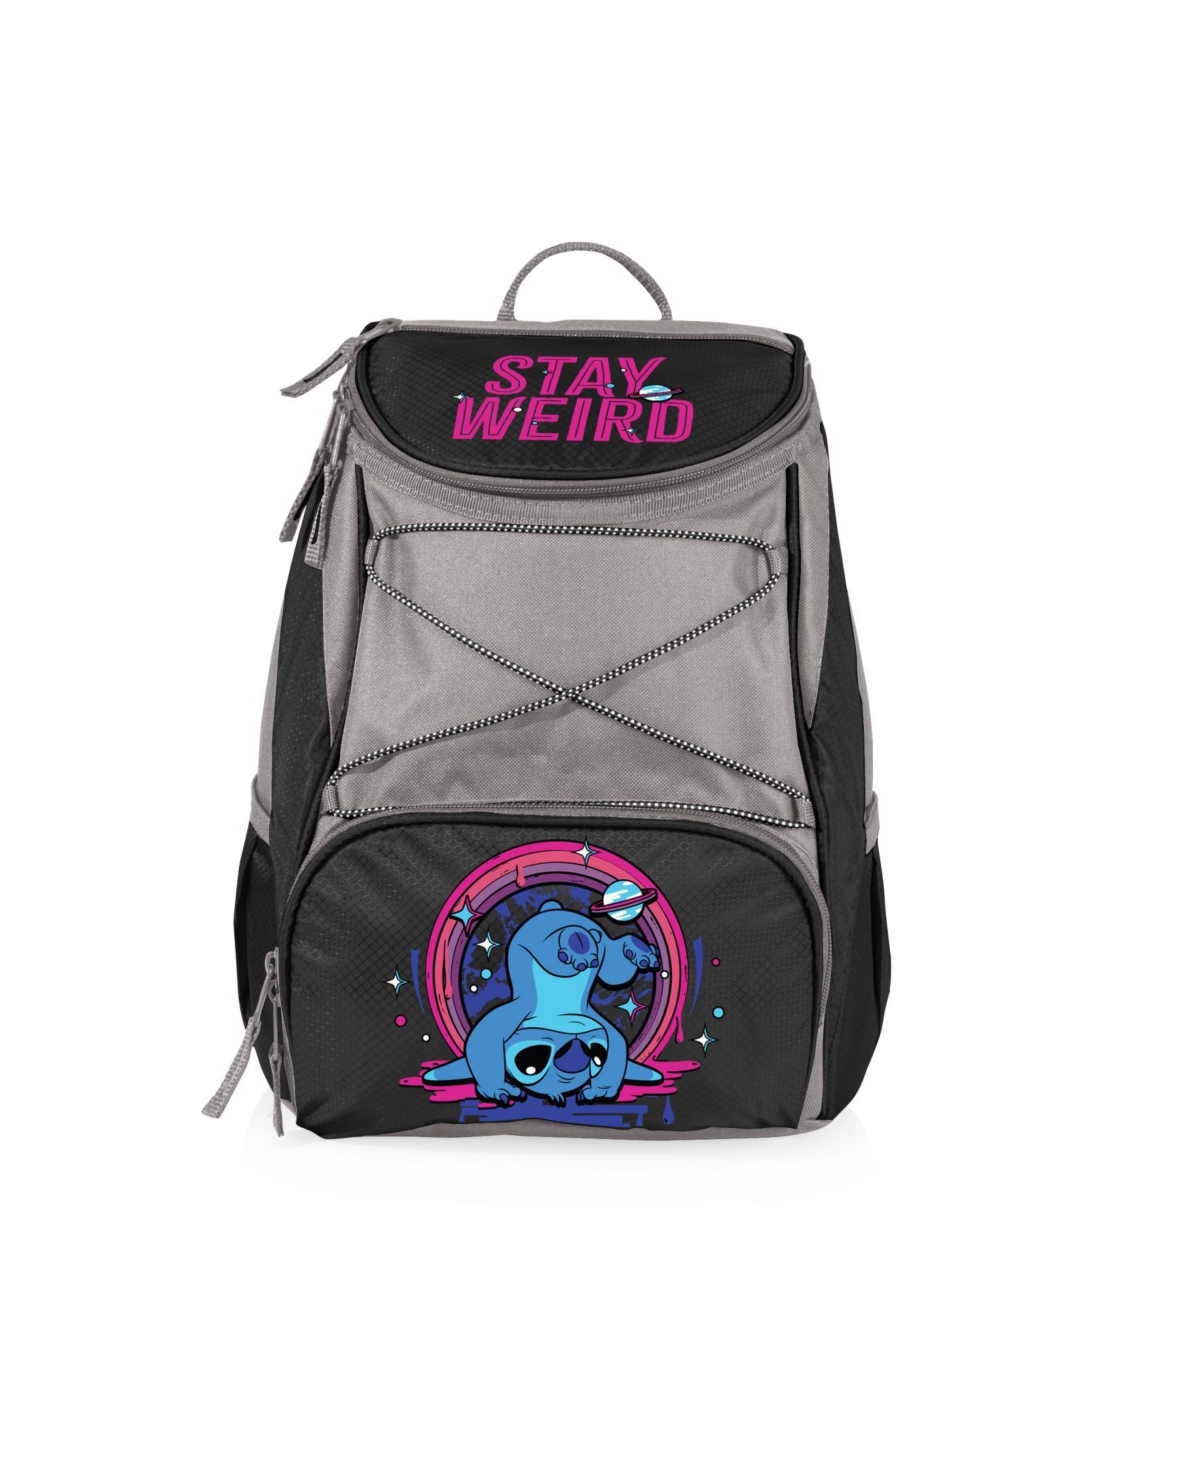 Oniva Disney's Lilo and Stitch Backpack Cooler - Black